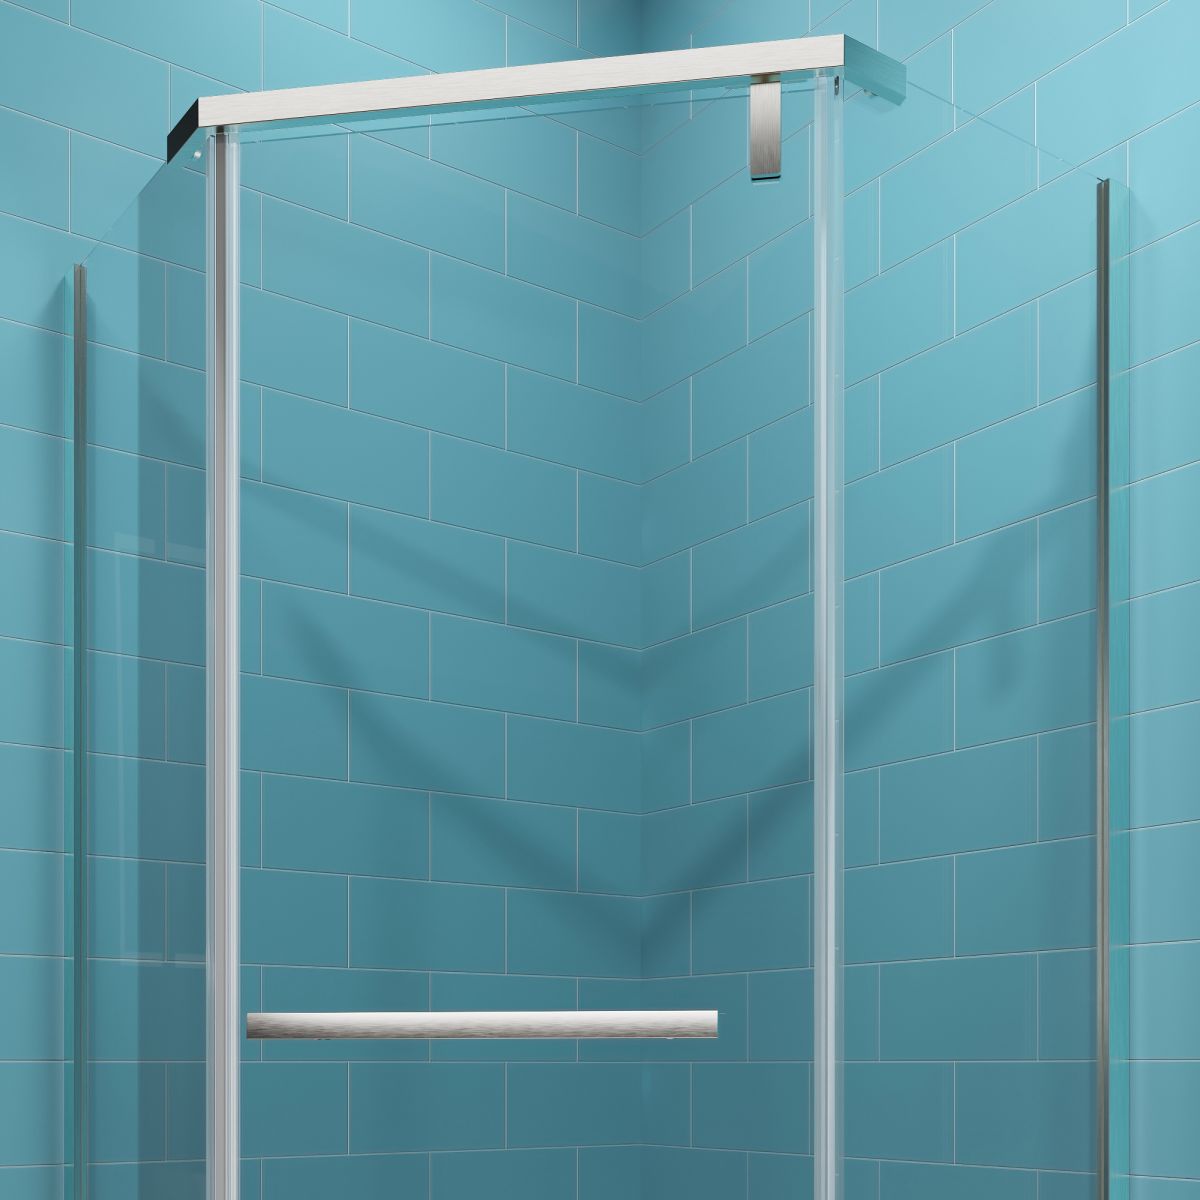 Prism Neo-Angle Frameless Shower Door 36 in. W x 72 in. H,Corner Shower Enclosure,6mm Clear Glass,Pivot Shower Doors,Brushed Nickel